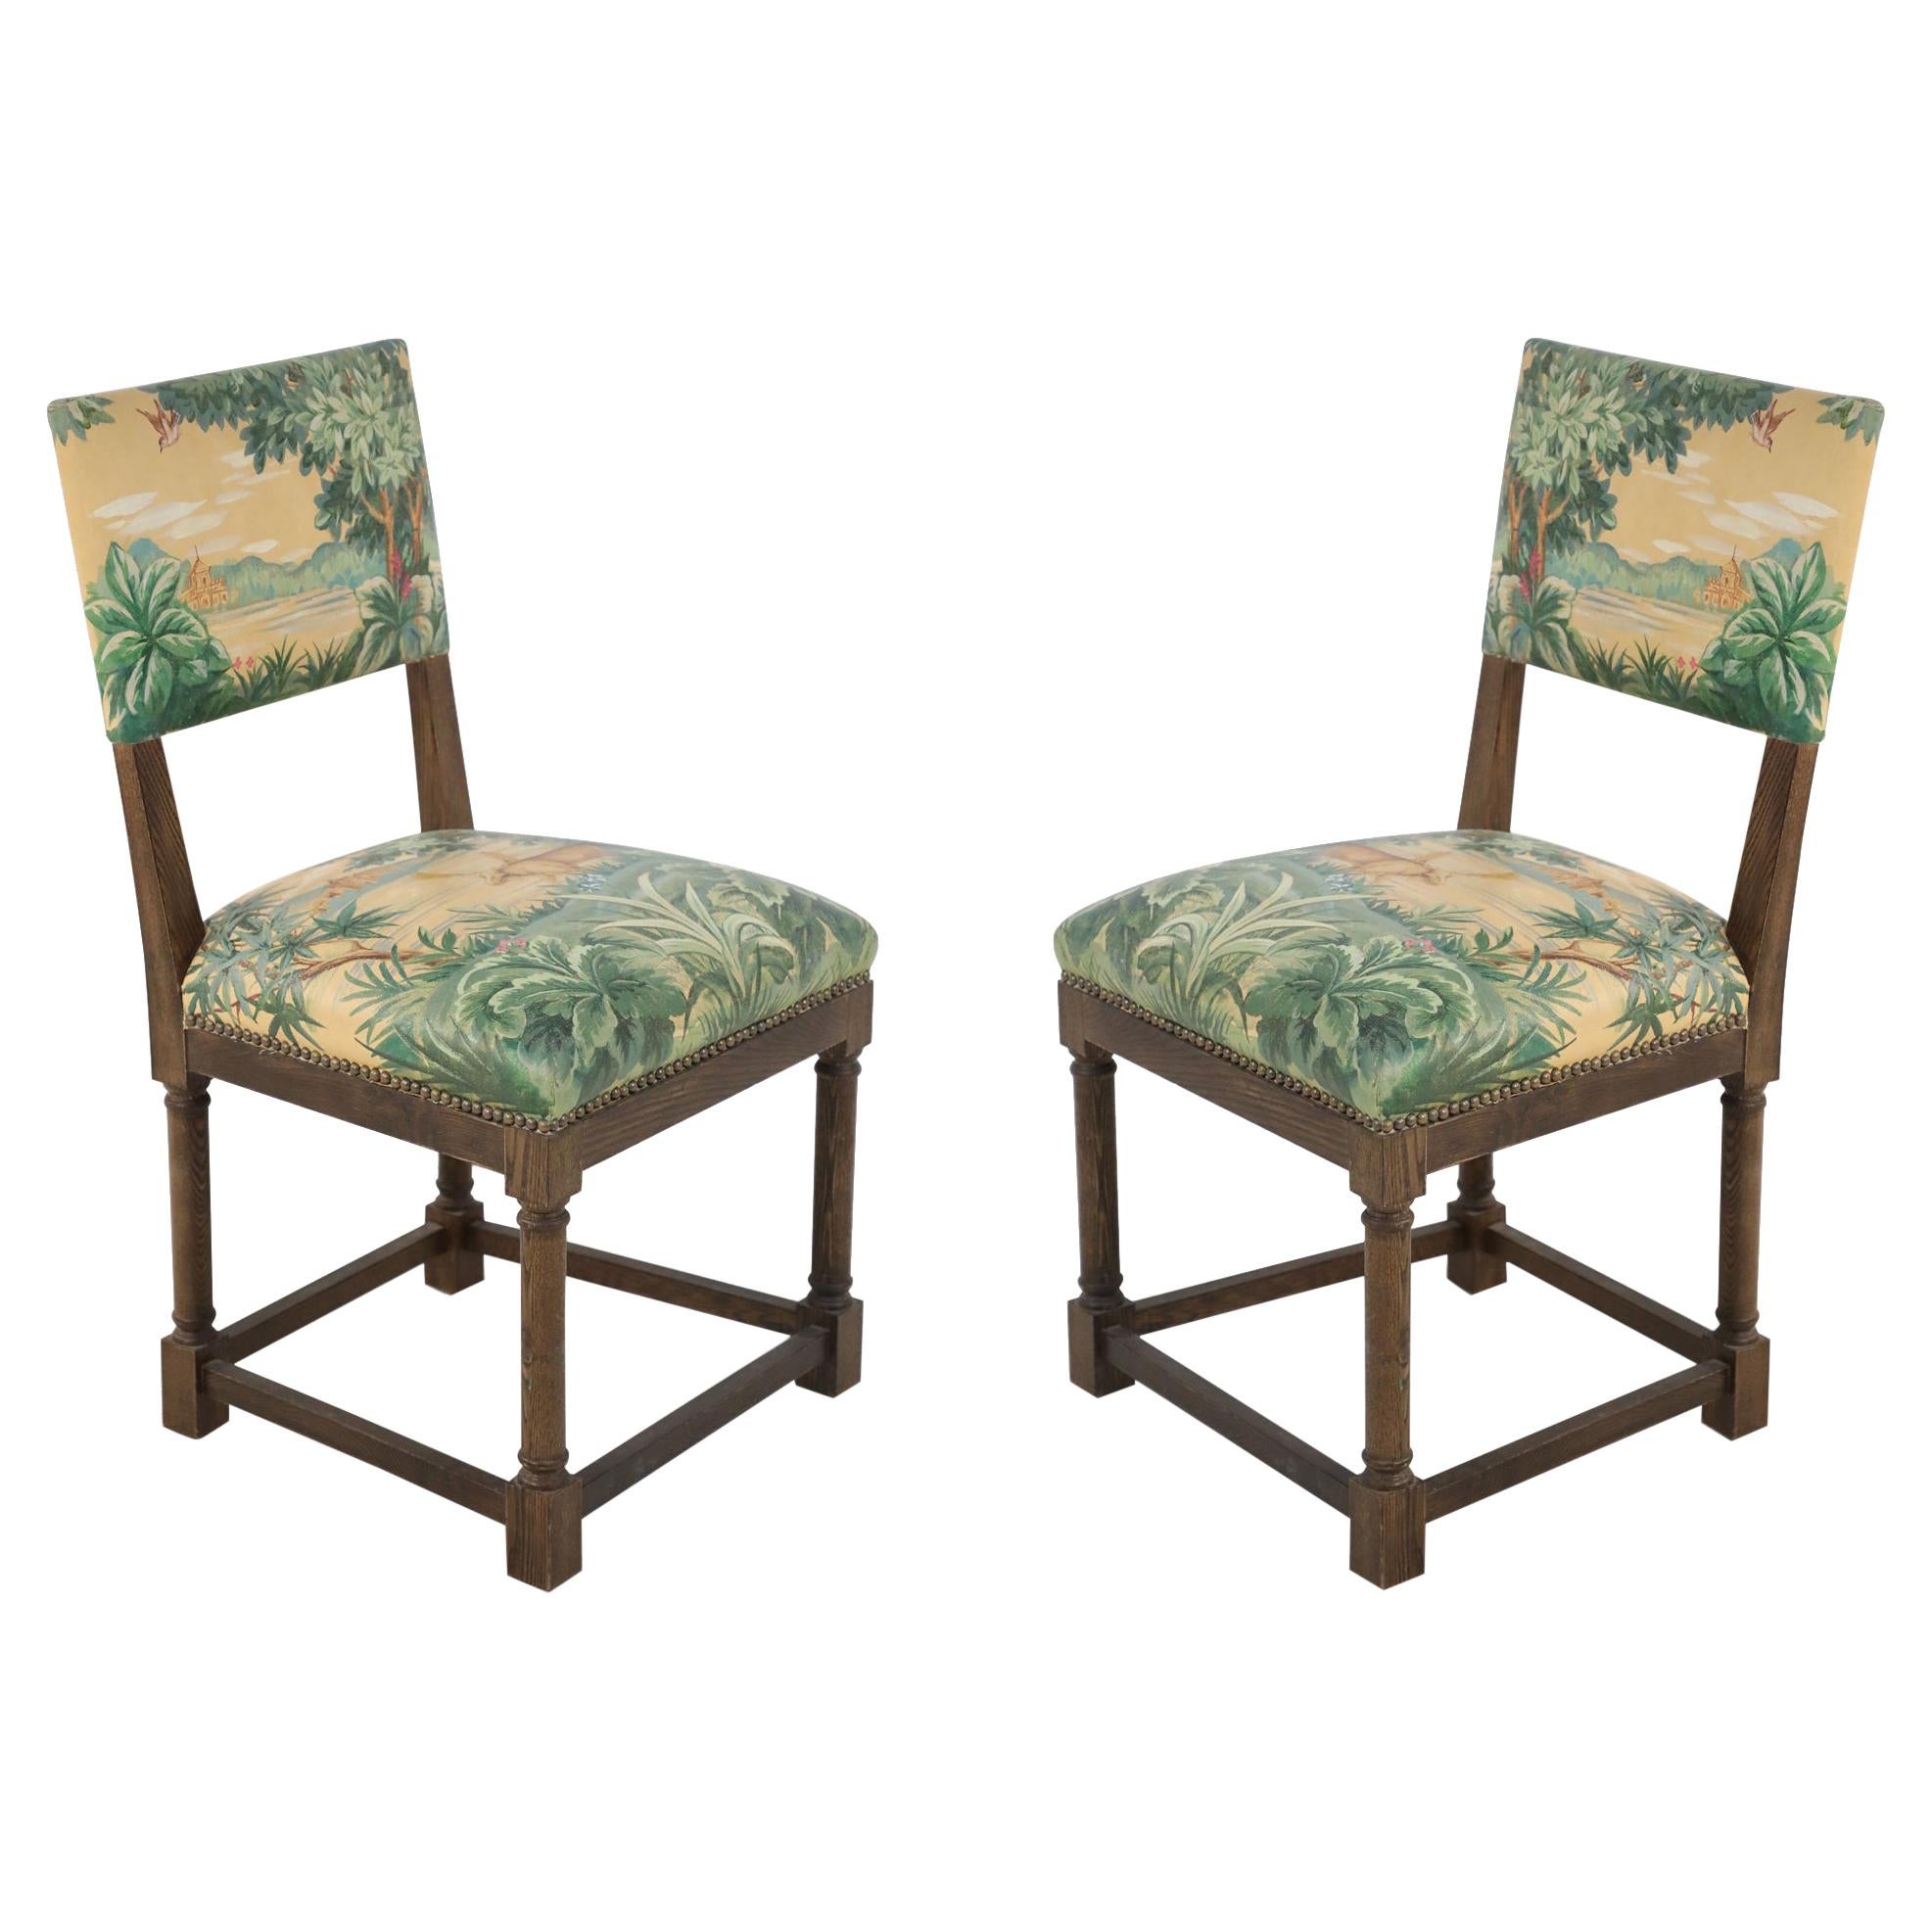 Pair of English Jacobean Style Faux Tapestry Painted Upholstery Side Chairs